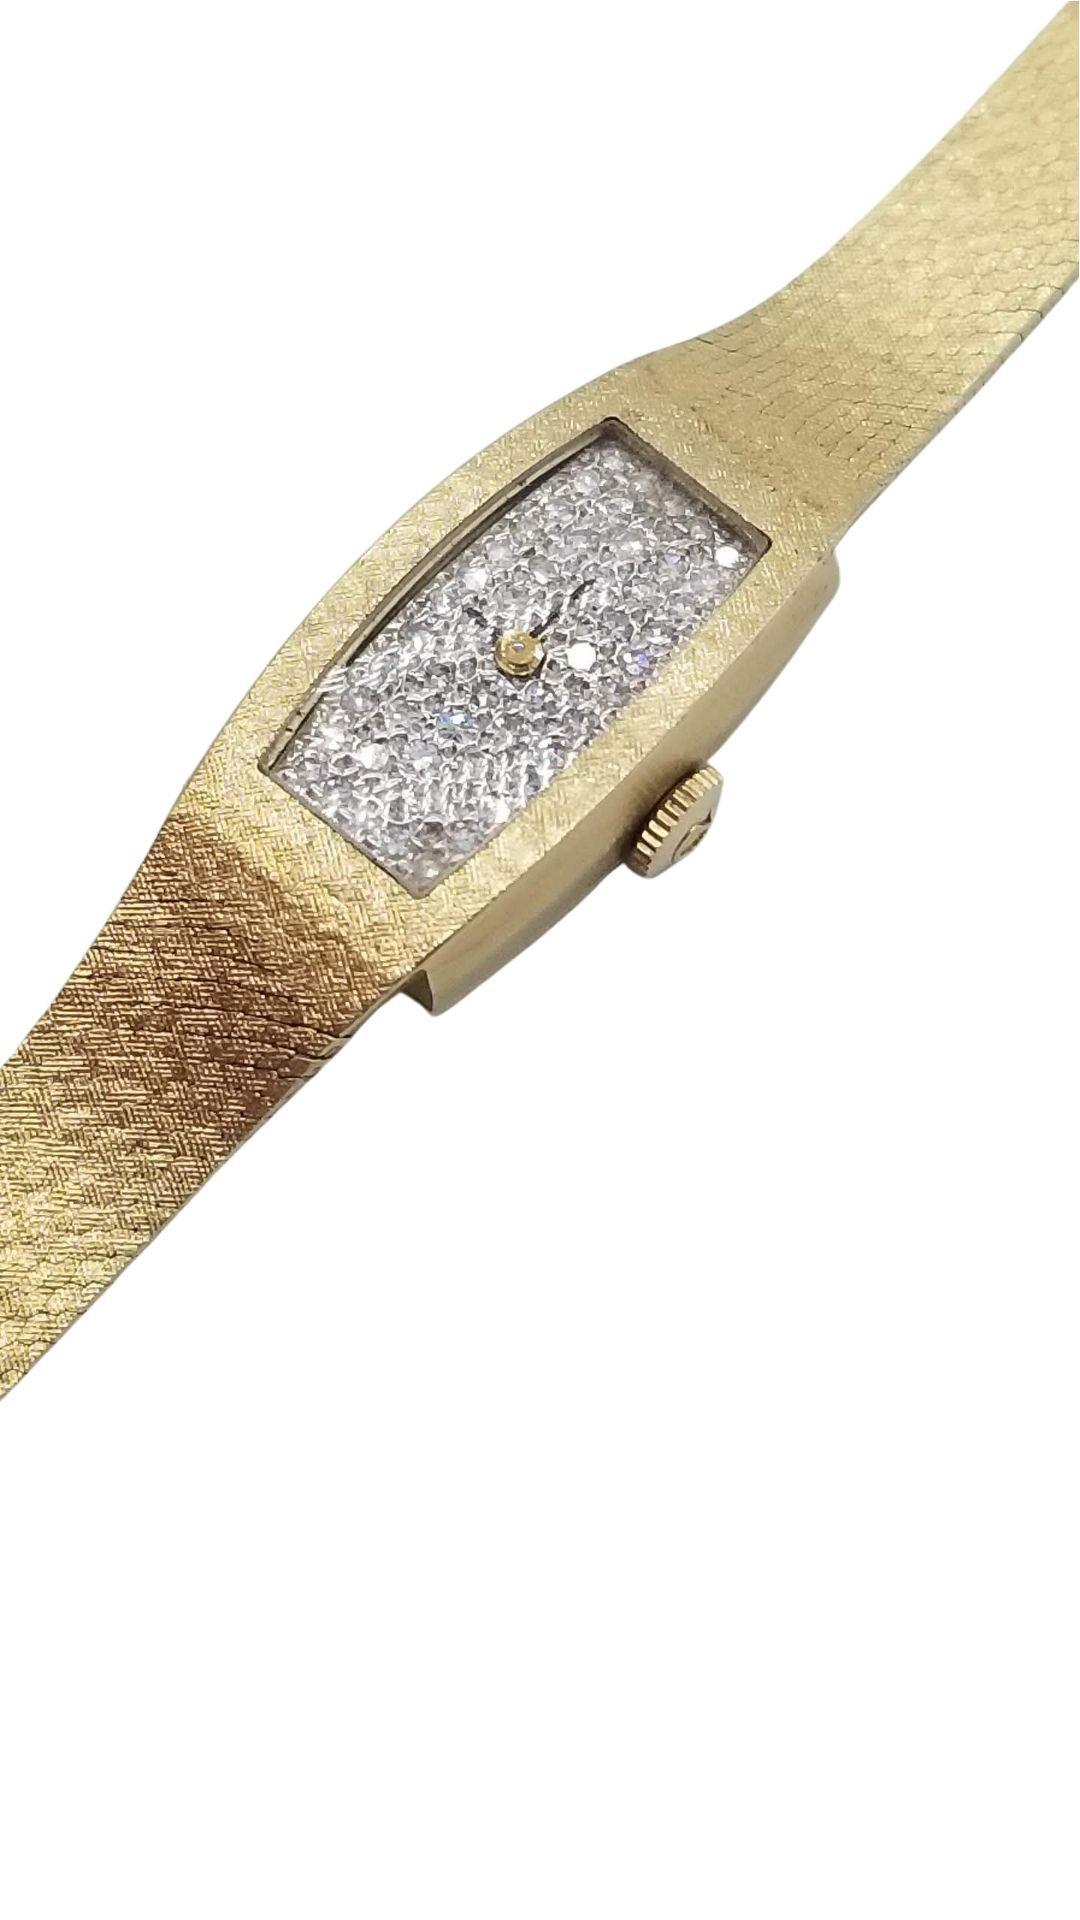 Vintage 1960 14k gold Omega women's wristwatch with a diamond-encrusted watch face containing over 20 1ct diamonds and features a manual wind movement. The movement has been serviced and keeps time well. The watch is 7.5